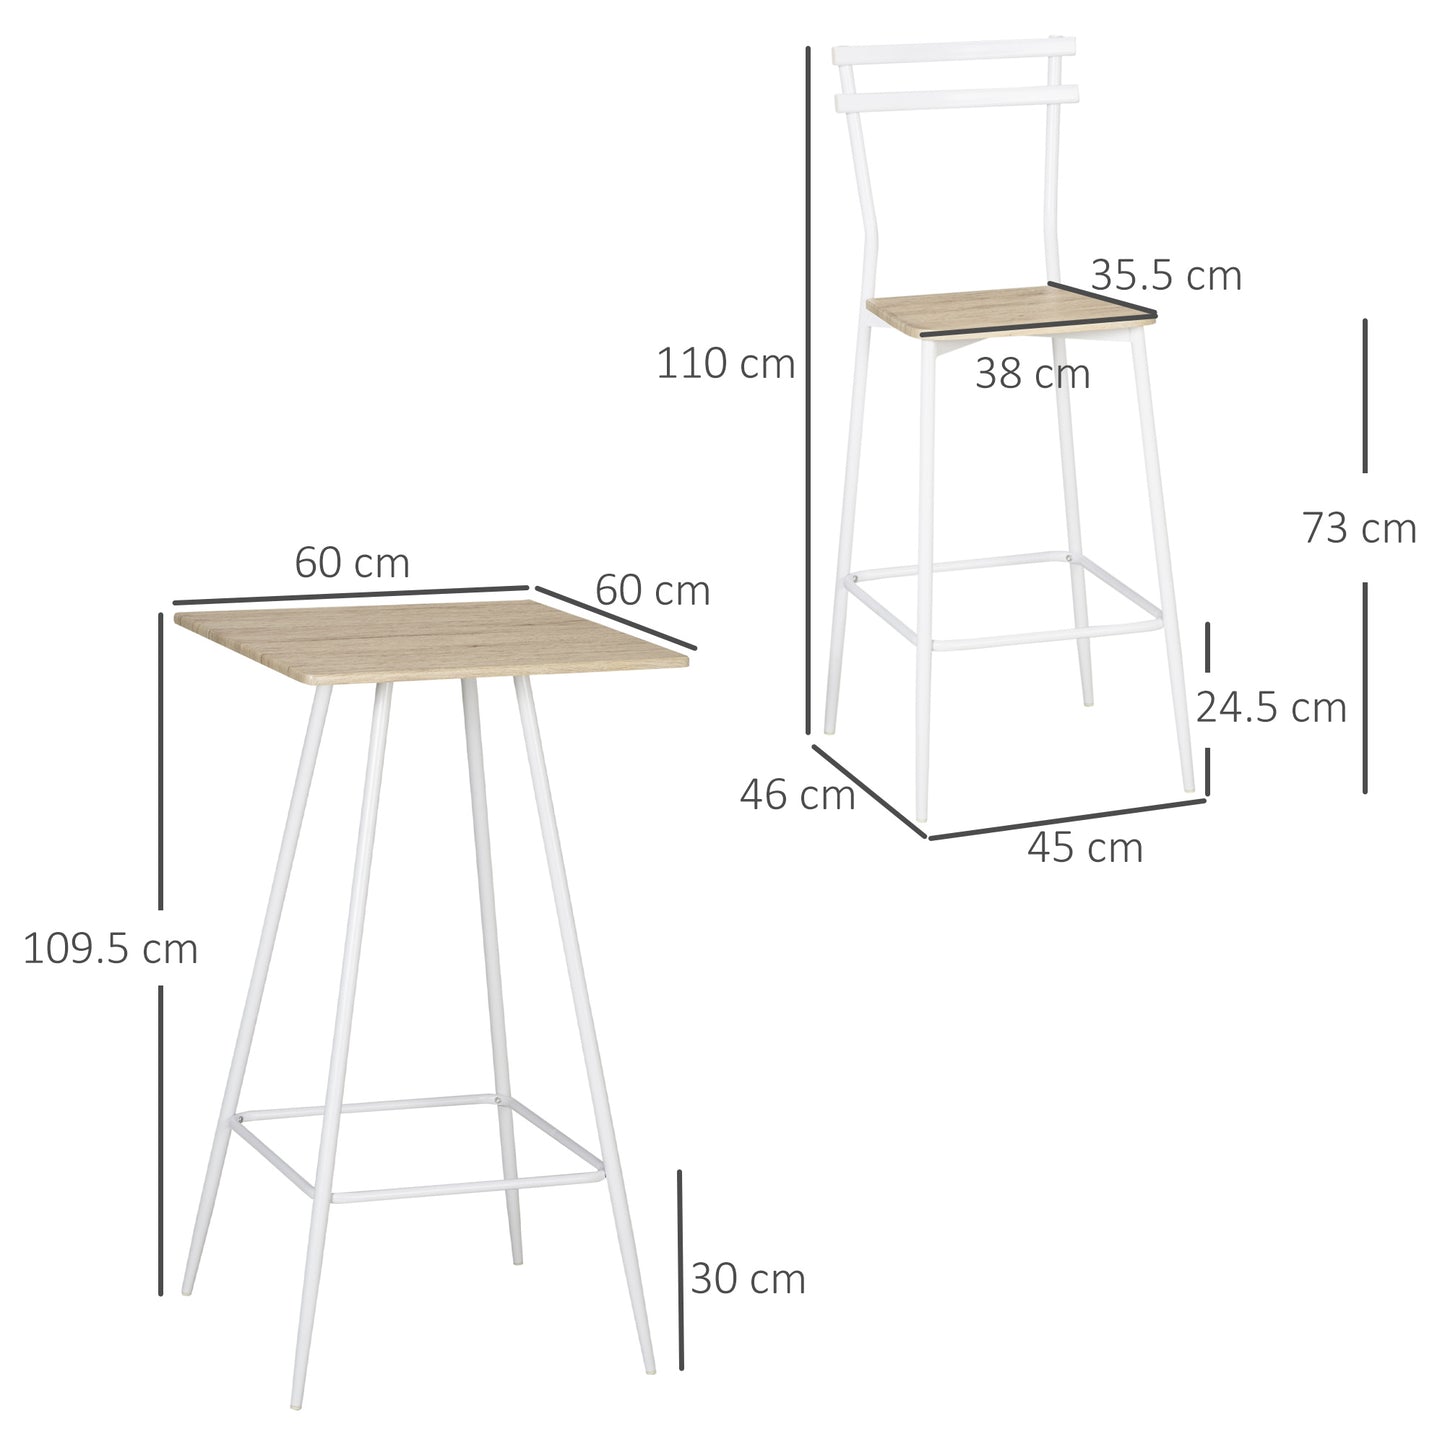 HOMCOM Bar Table and Stools, Breakfast Dining Table and Stools Set with Steel Frame and Footrest for Bar and Kitchen, White and Oak